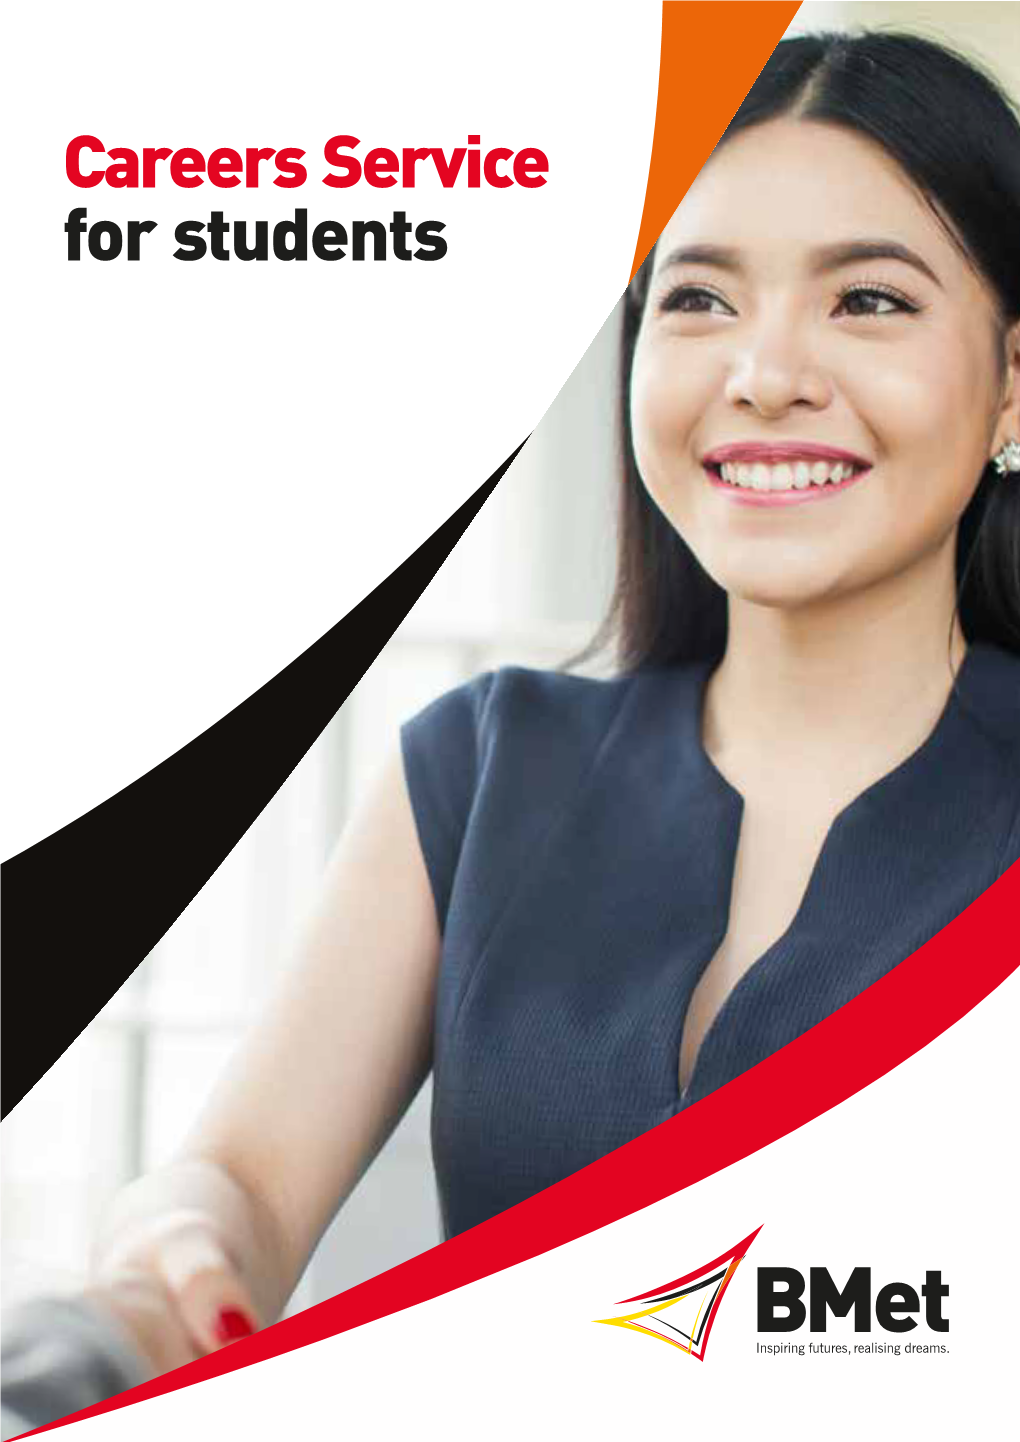 Careers Service for Students